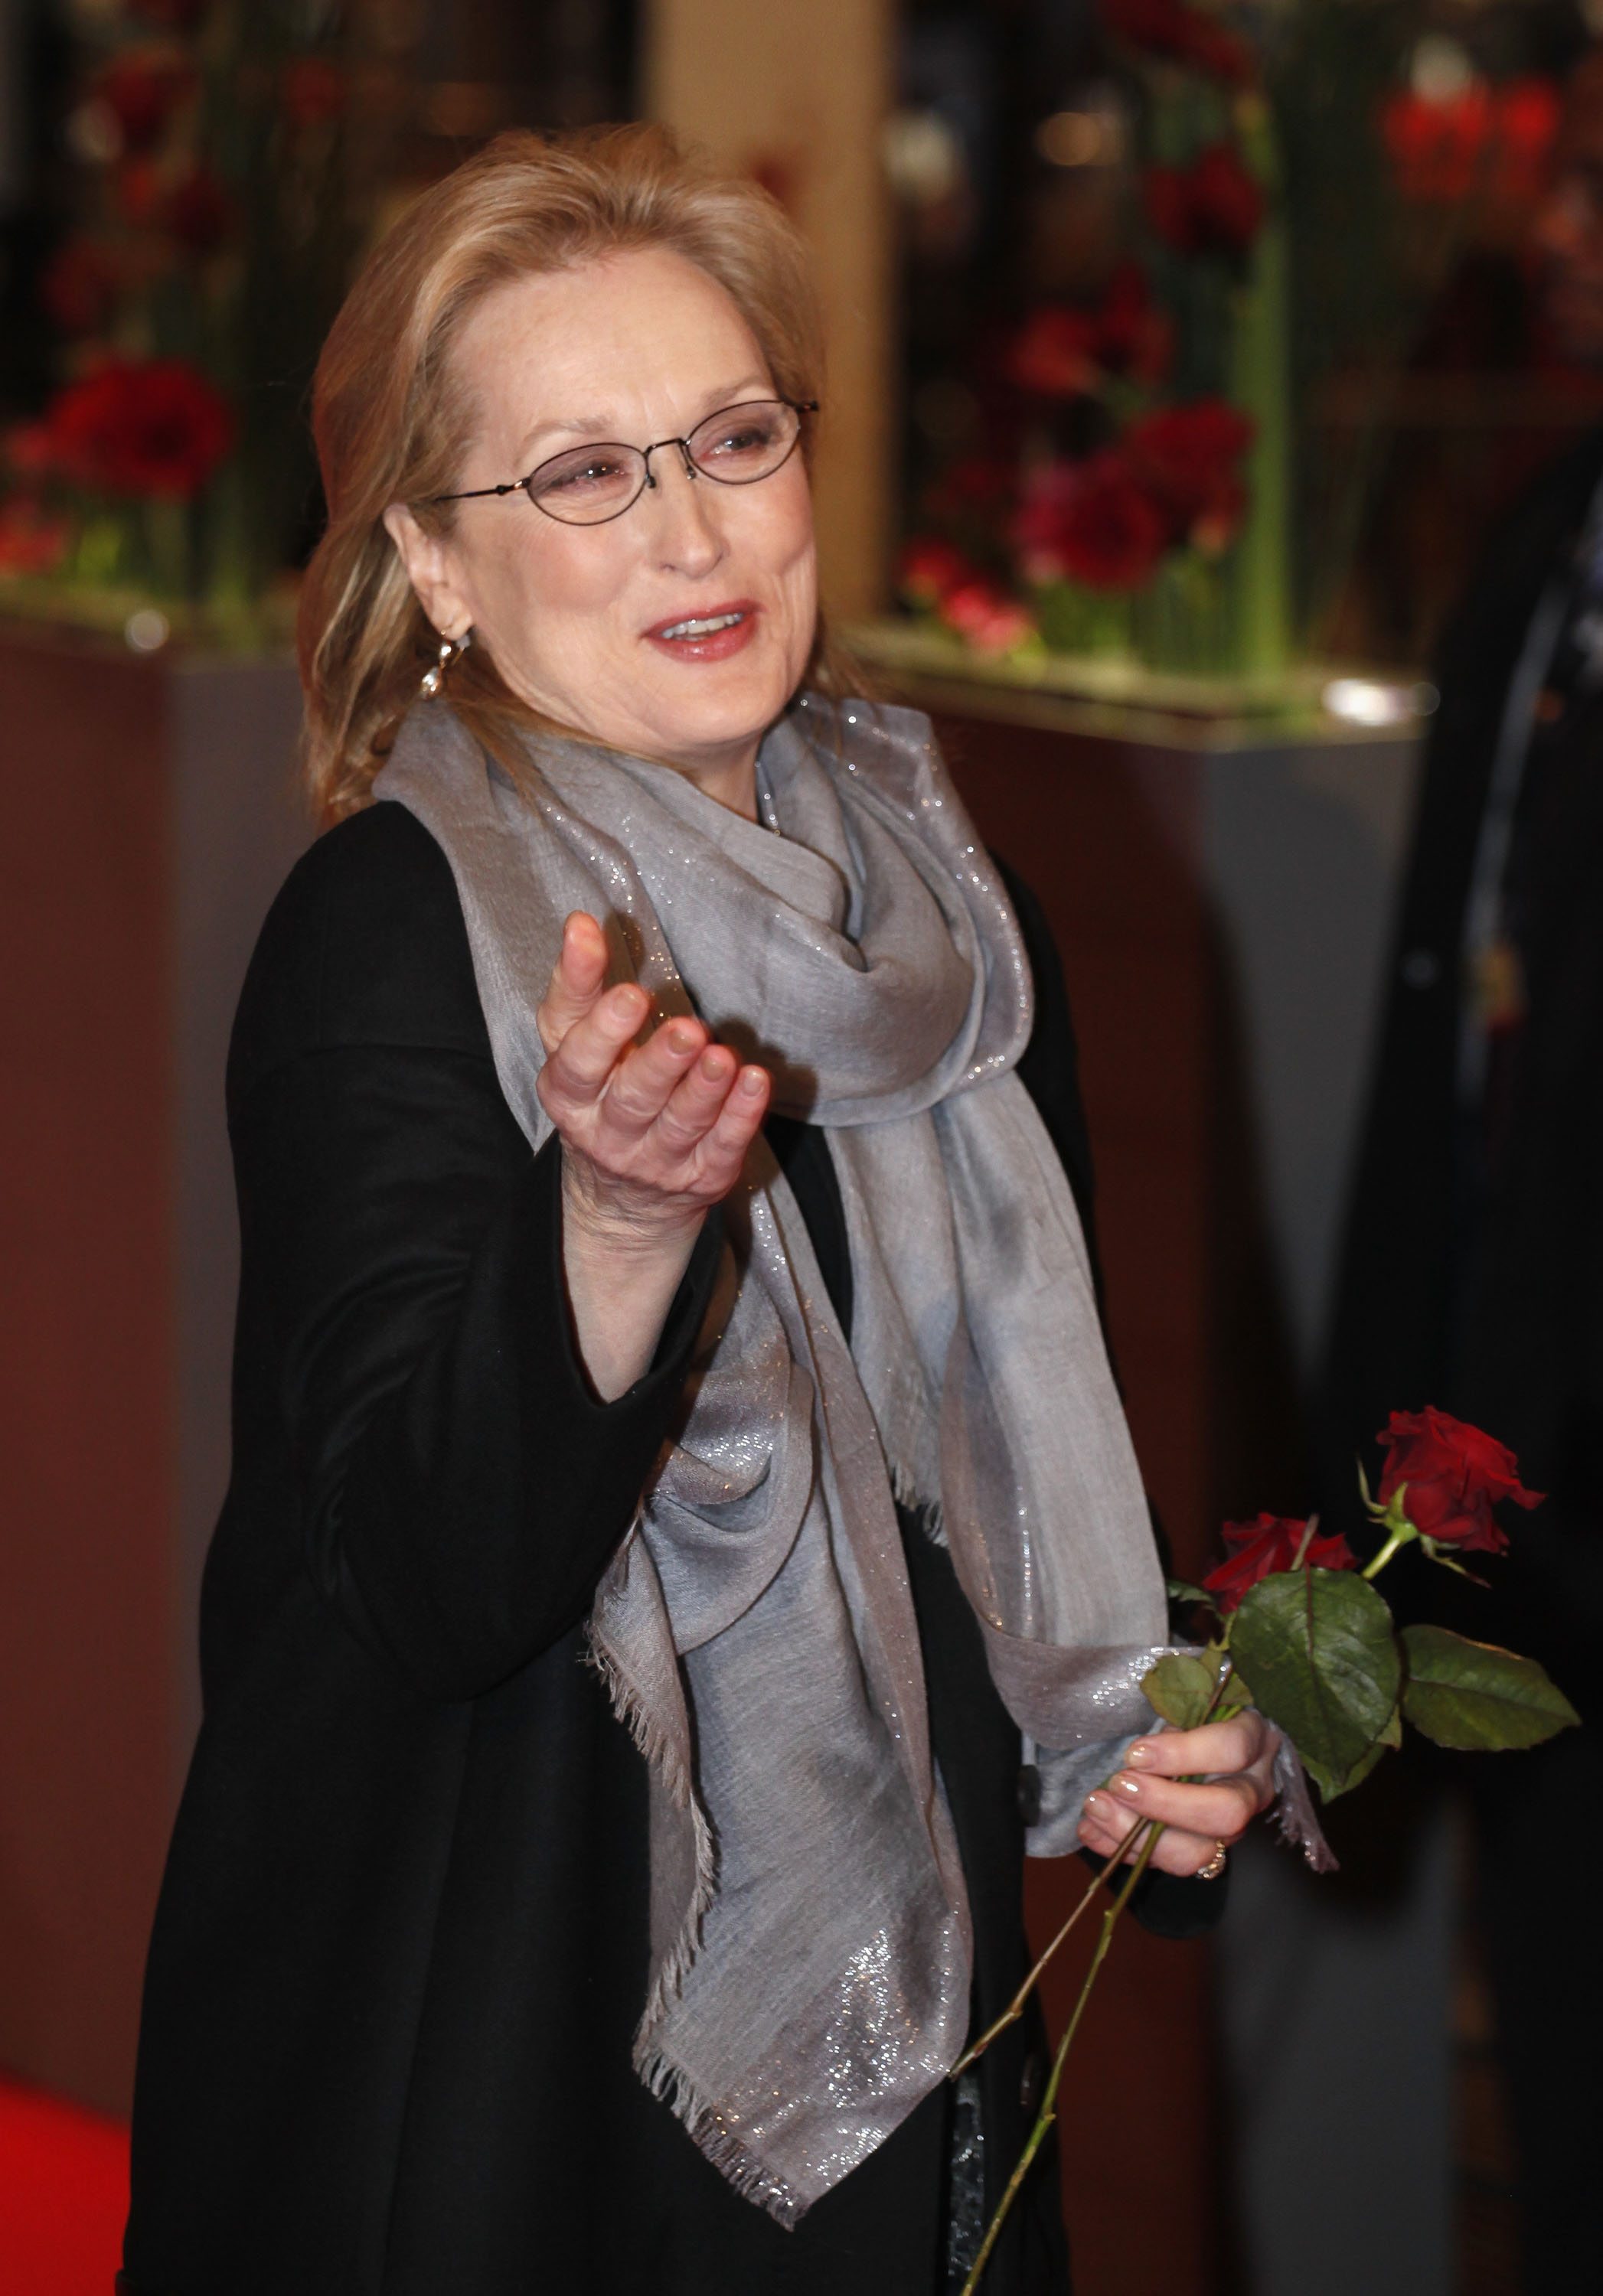 Meryl Streep at the premiere of "The Iron Lady" during day six of the 62nd Berlin International Film Festival at the Berlinale Palast on February 14, 2012 in Berlin, Germany | Source: Getty Images